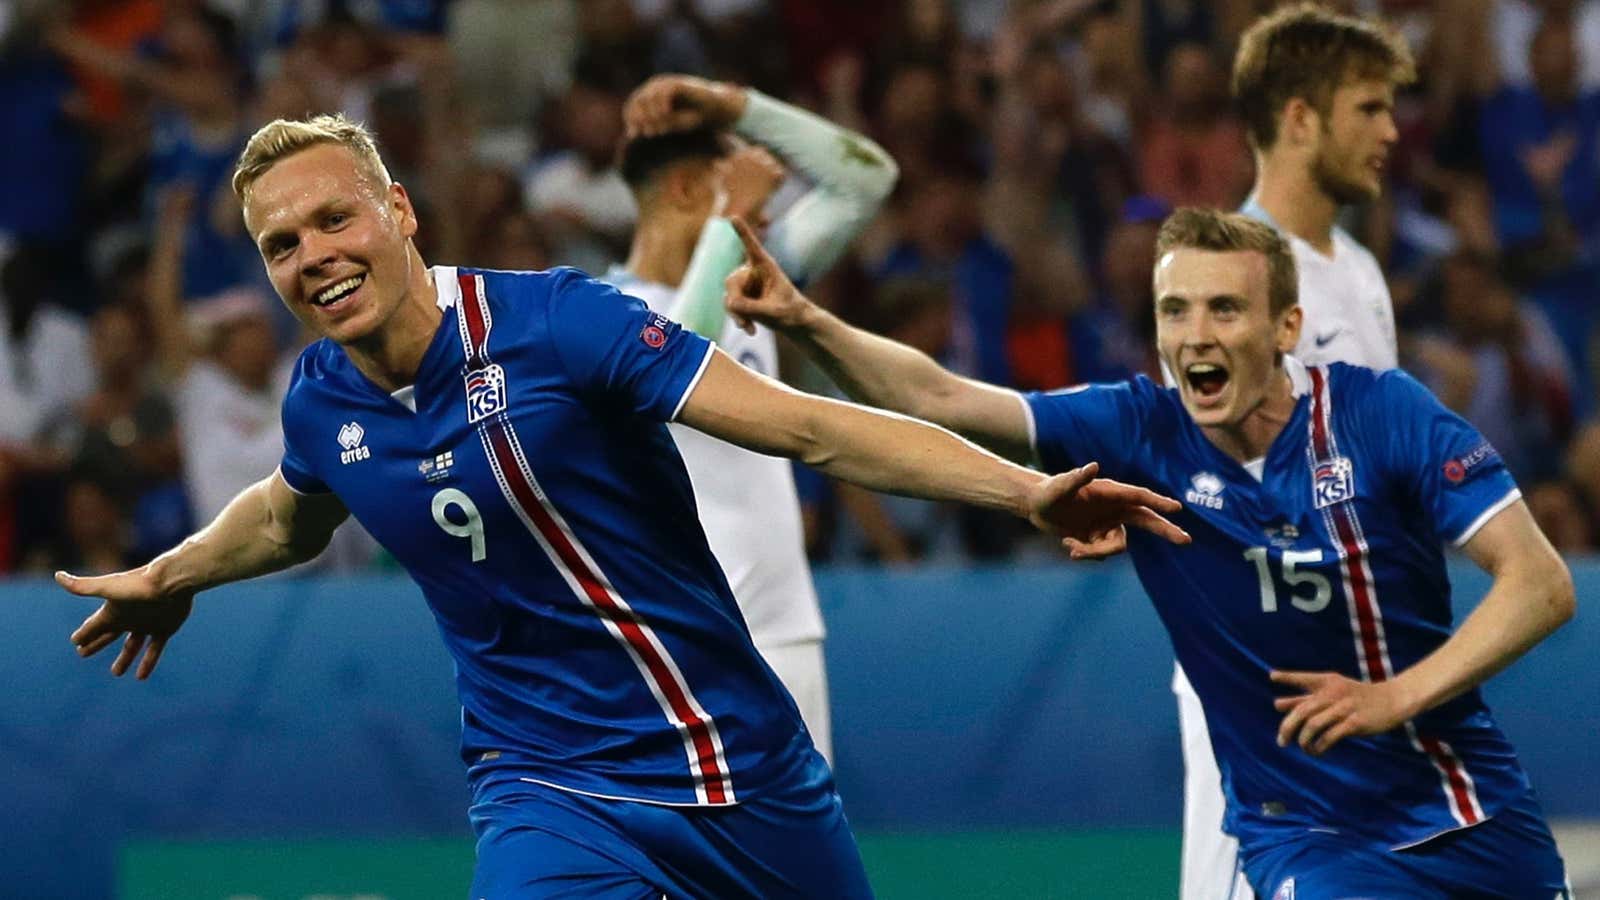 Iceland finding success on and off the field.